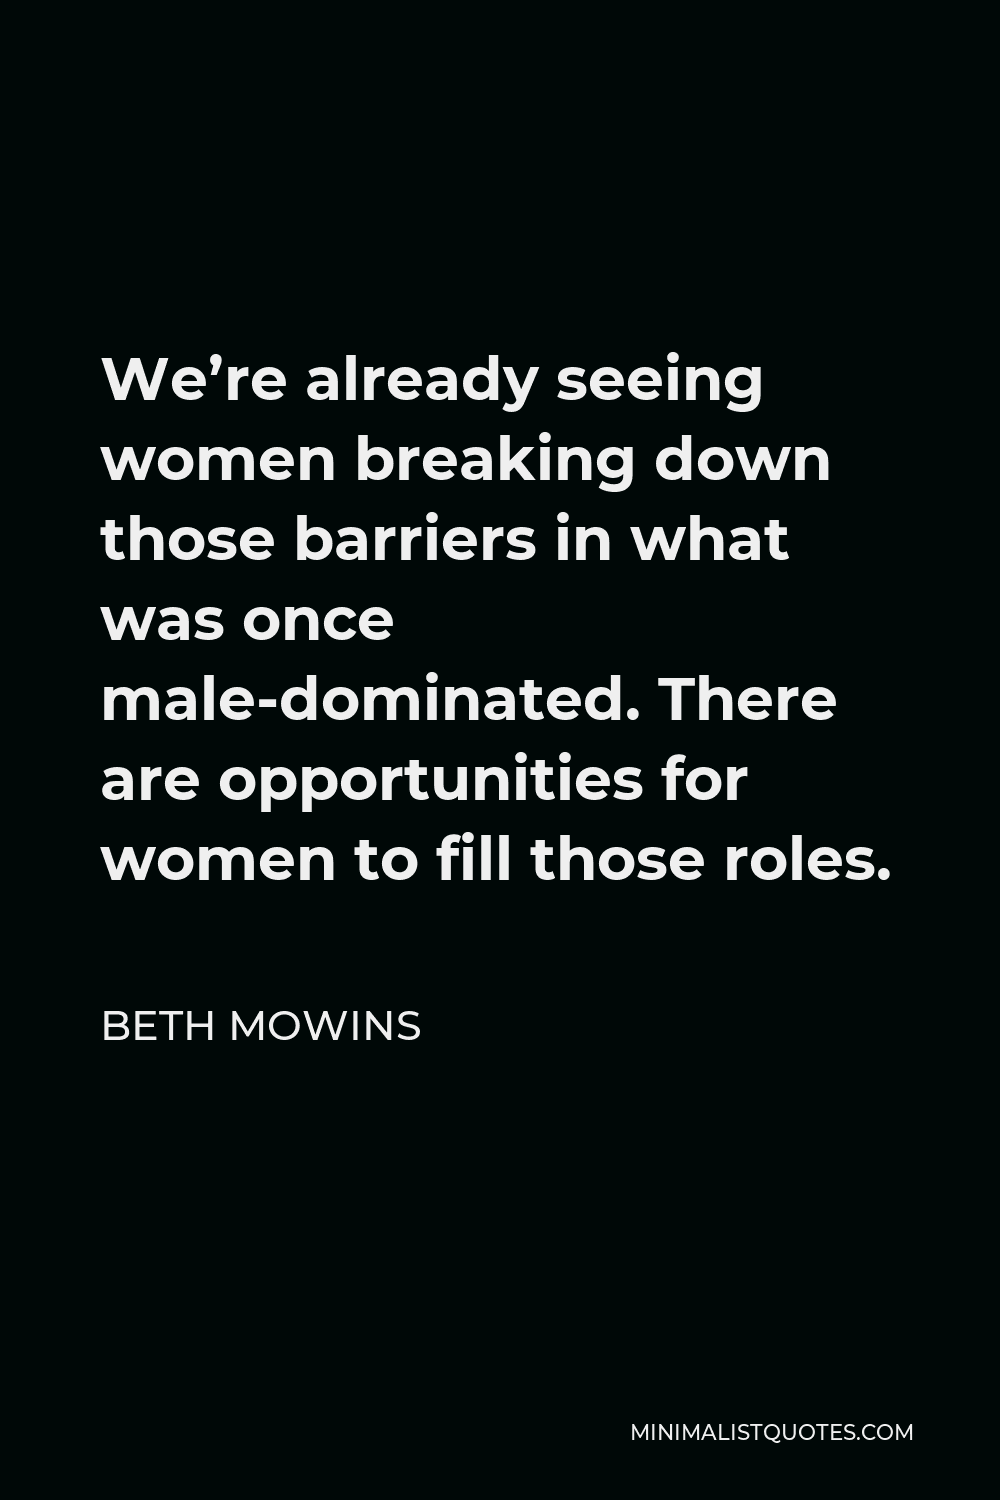 Beth Mowins Quote - We’re already seeing women breaking down those barriers in what was once male-dominated. There are opportunities for women to fill those roles.